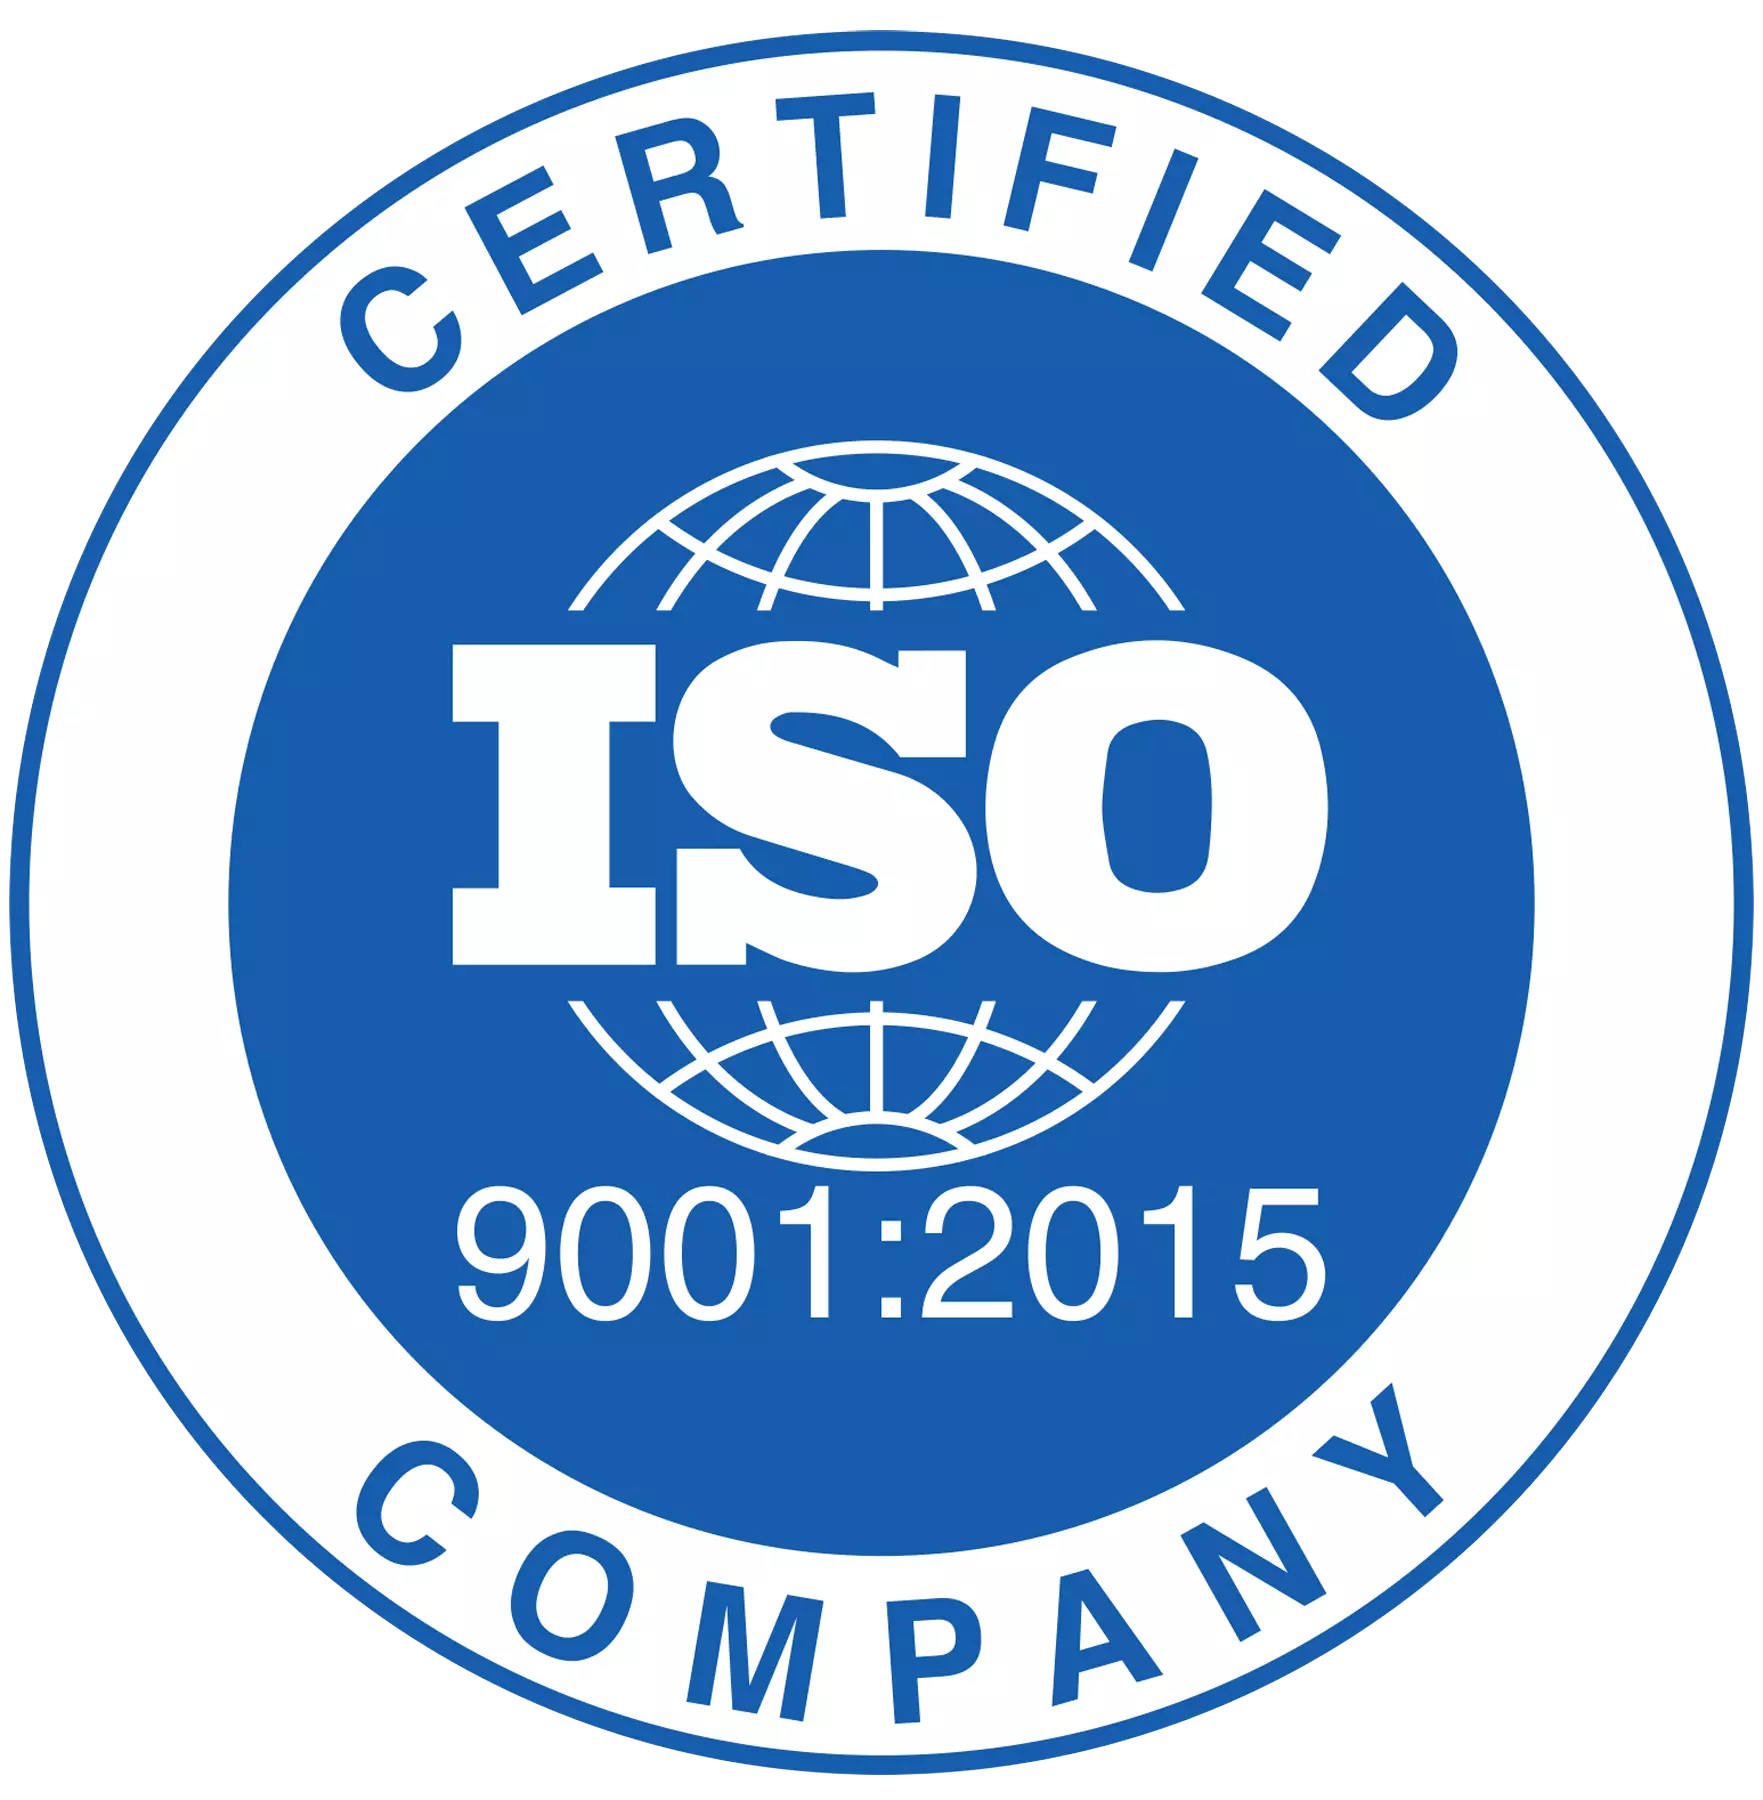 Image of the ISO certificate 9001:2015